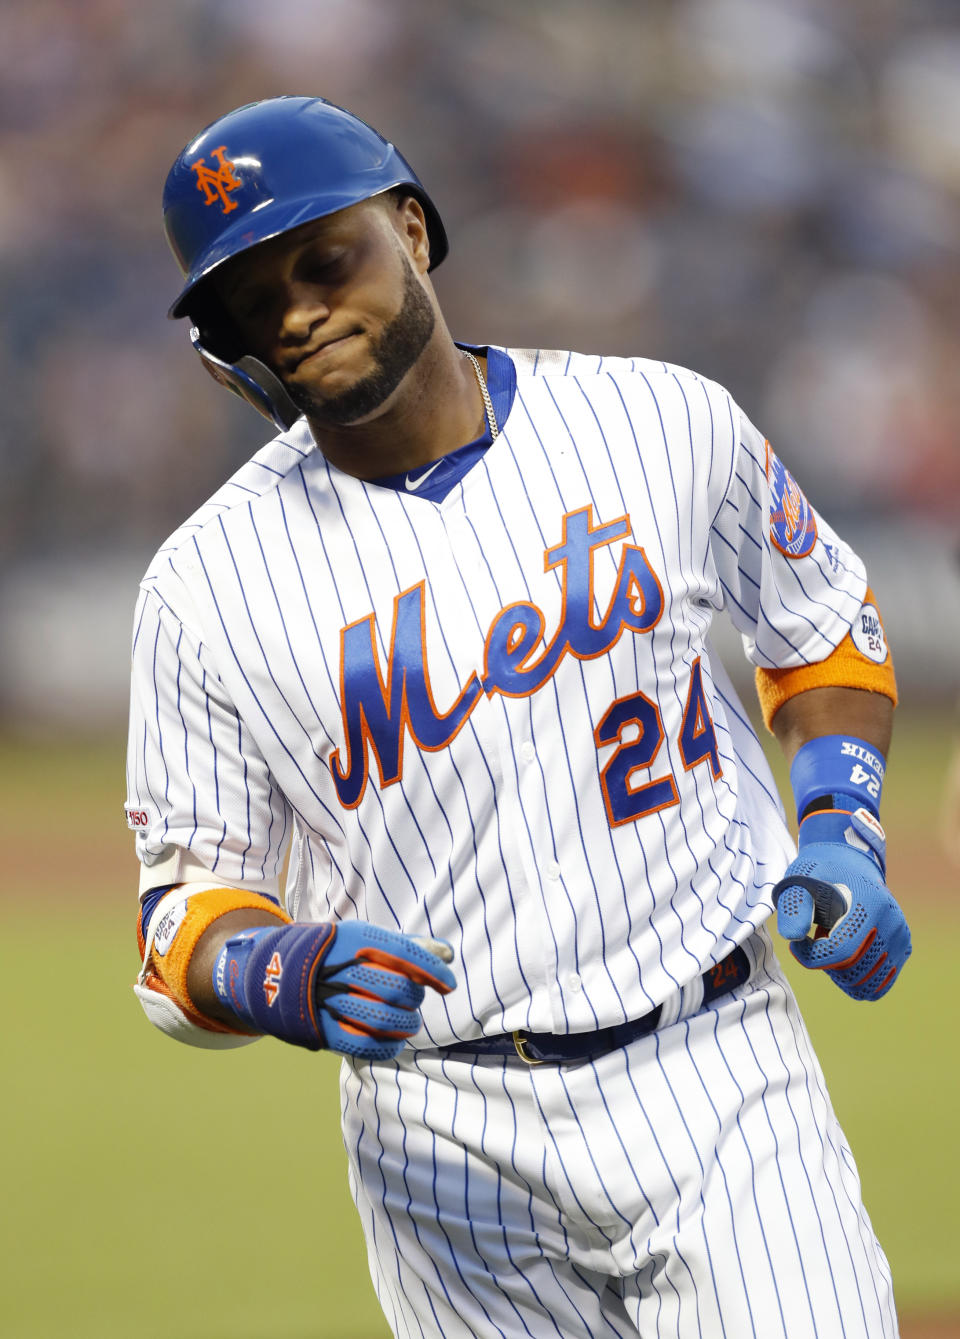 New York Mets' Robinson Cano reacts after grounding out with the bases loaded during the third inning of the team's baseball game against the San Francisco Giants, Wednesday, June 5, 2019, in New York. (AP Photo/Kathy Willens)